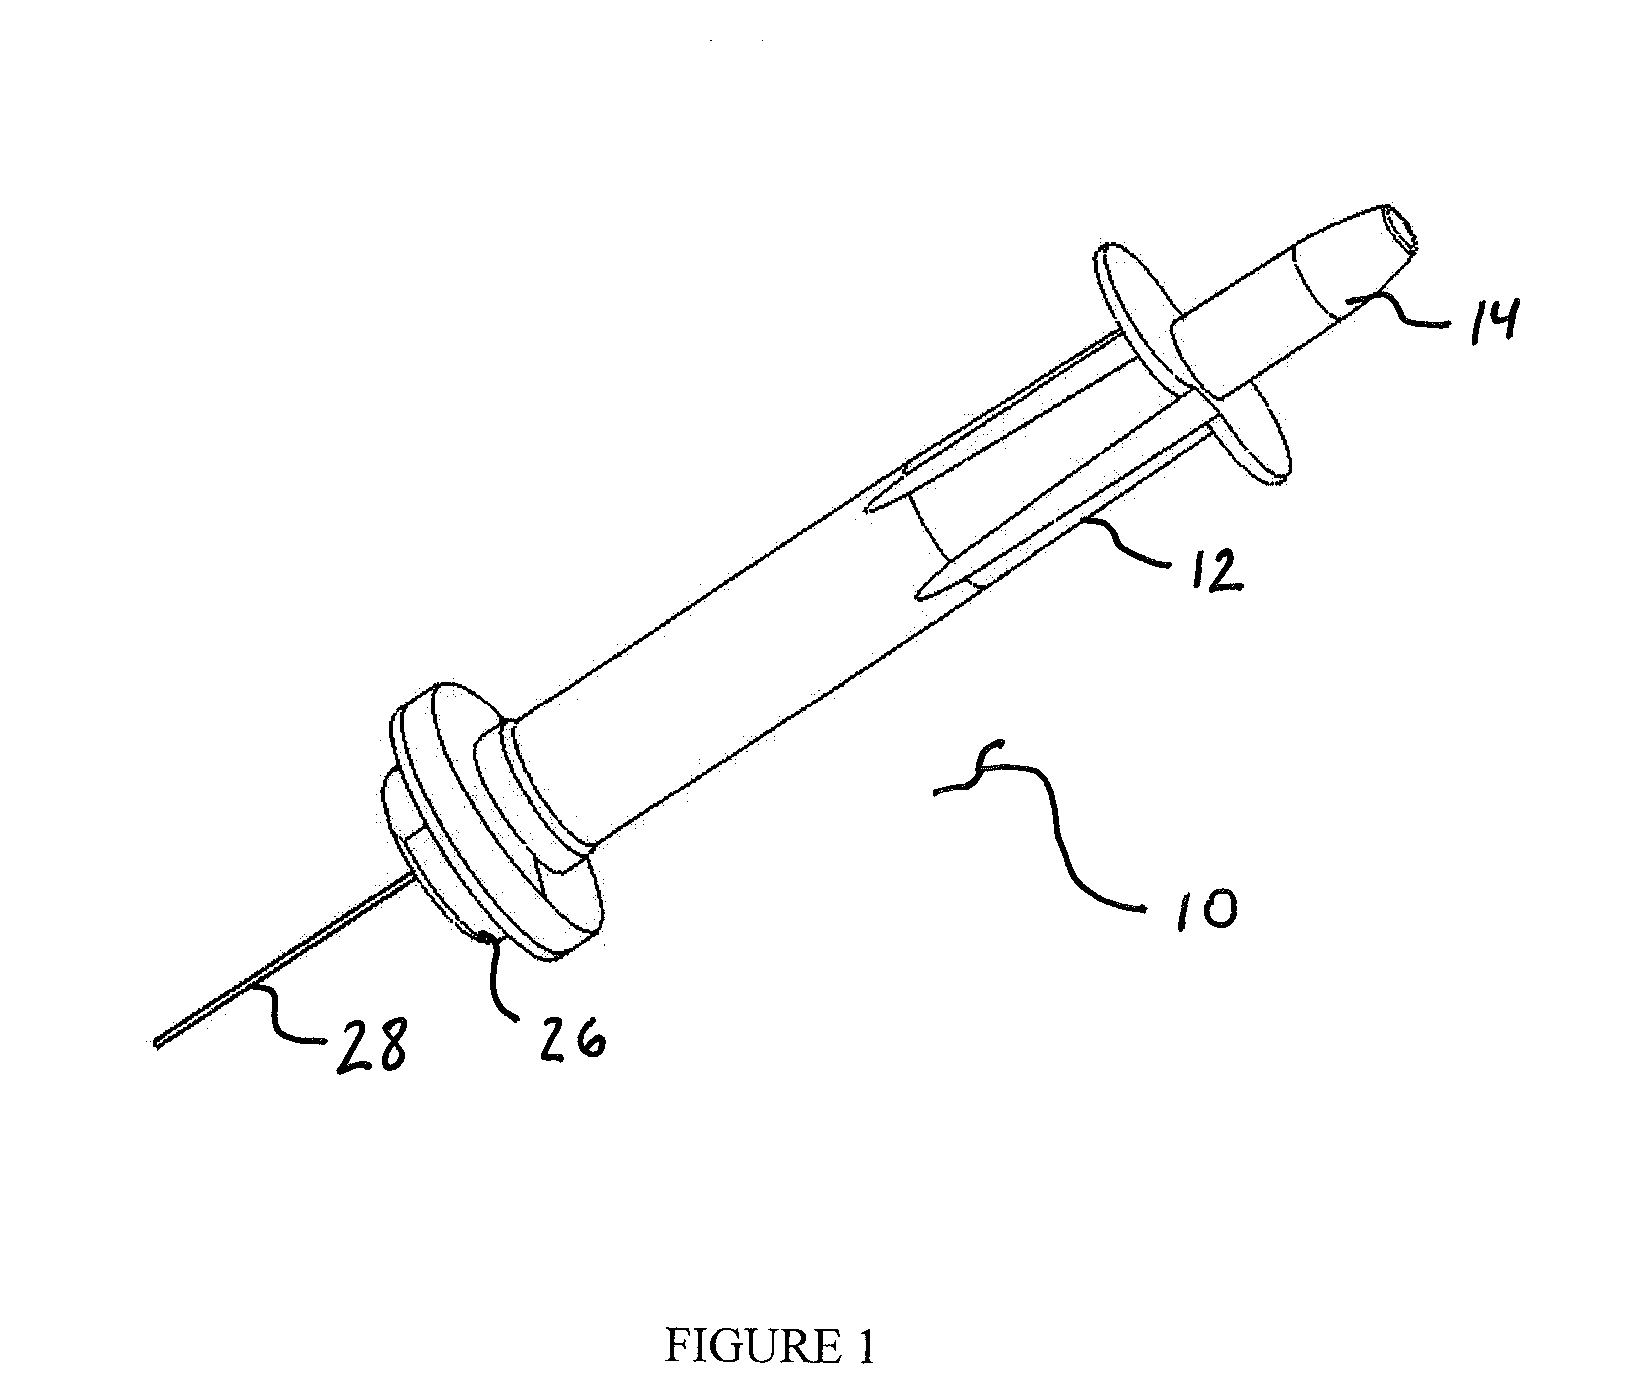 Single-hand operated syringe-like device that provides electronic chain of custody when securing a sample for analysis